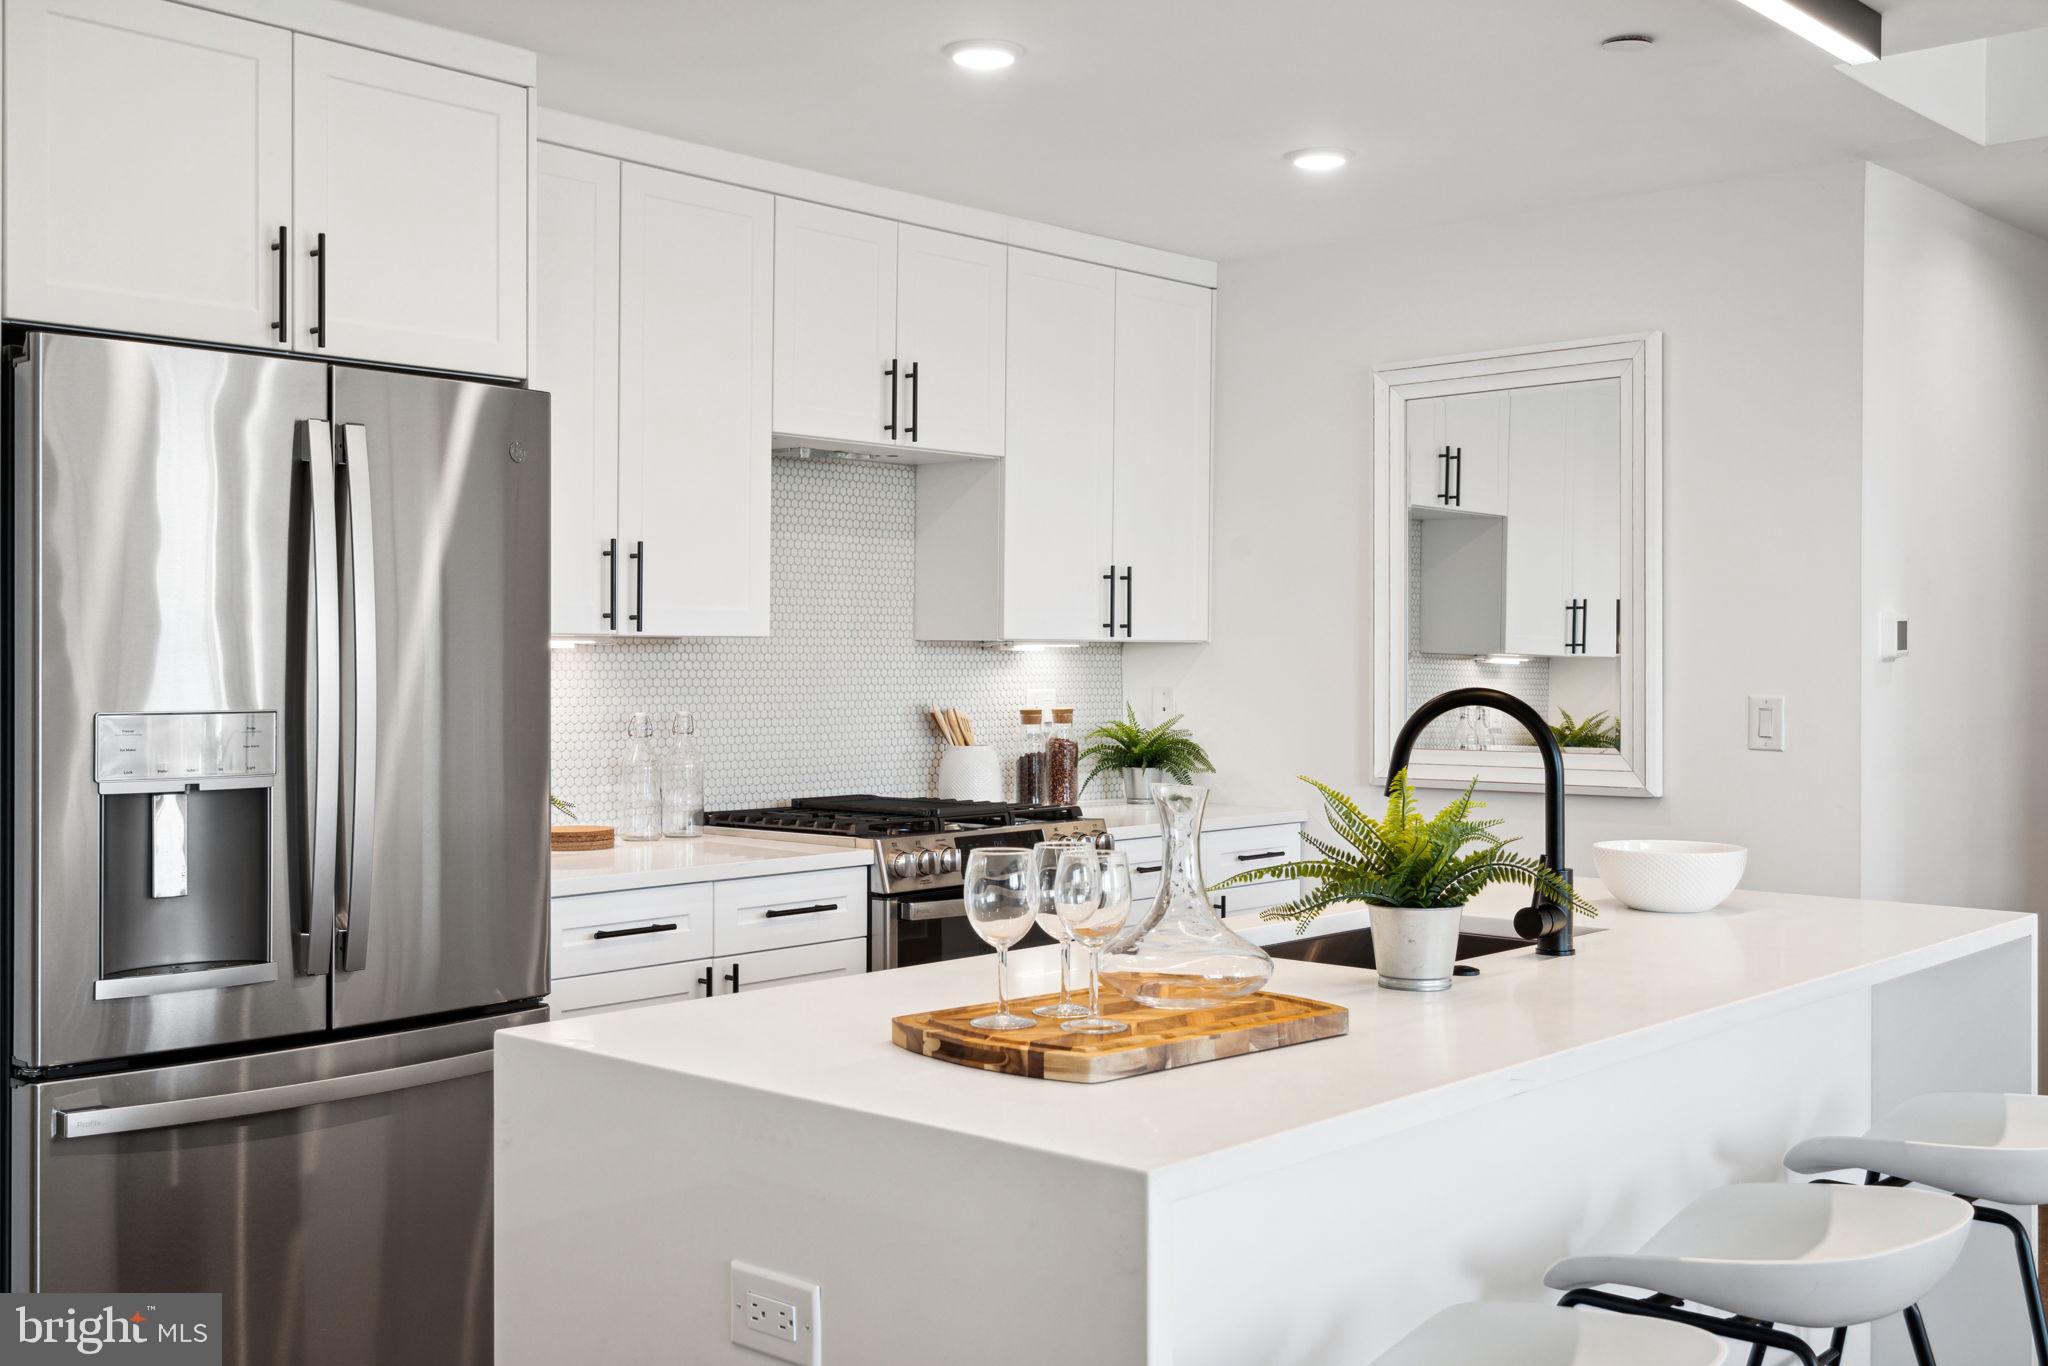 a kitchen with stainless steel appliances kitchen island a refrigerator sink and white cabinets